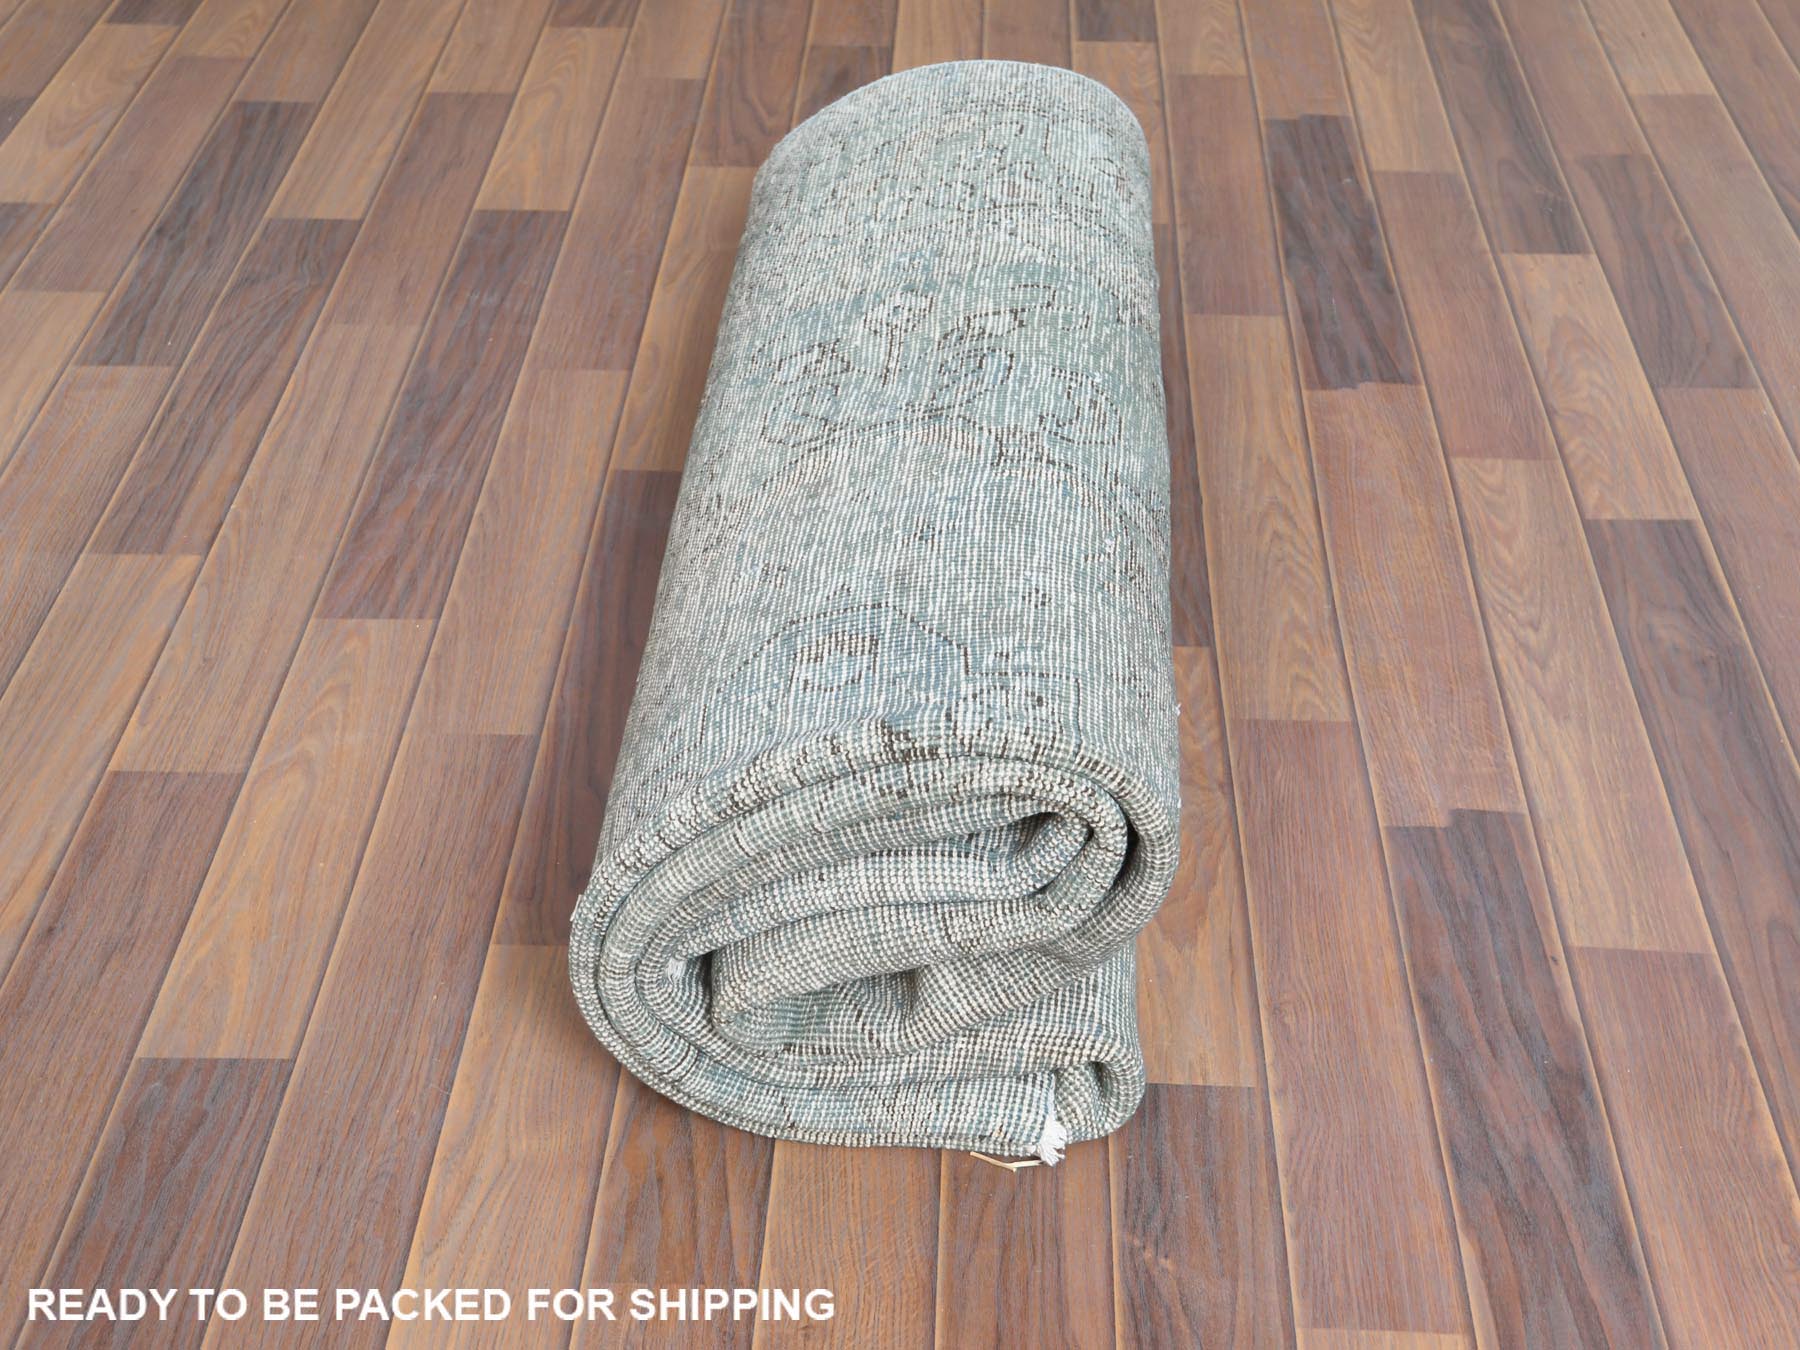 Overdyed & Vintage Rugs LUV554562